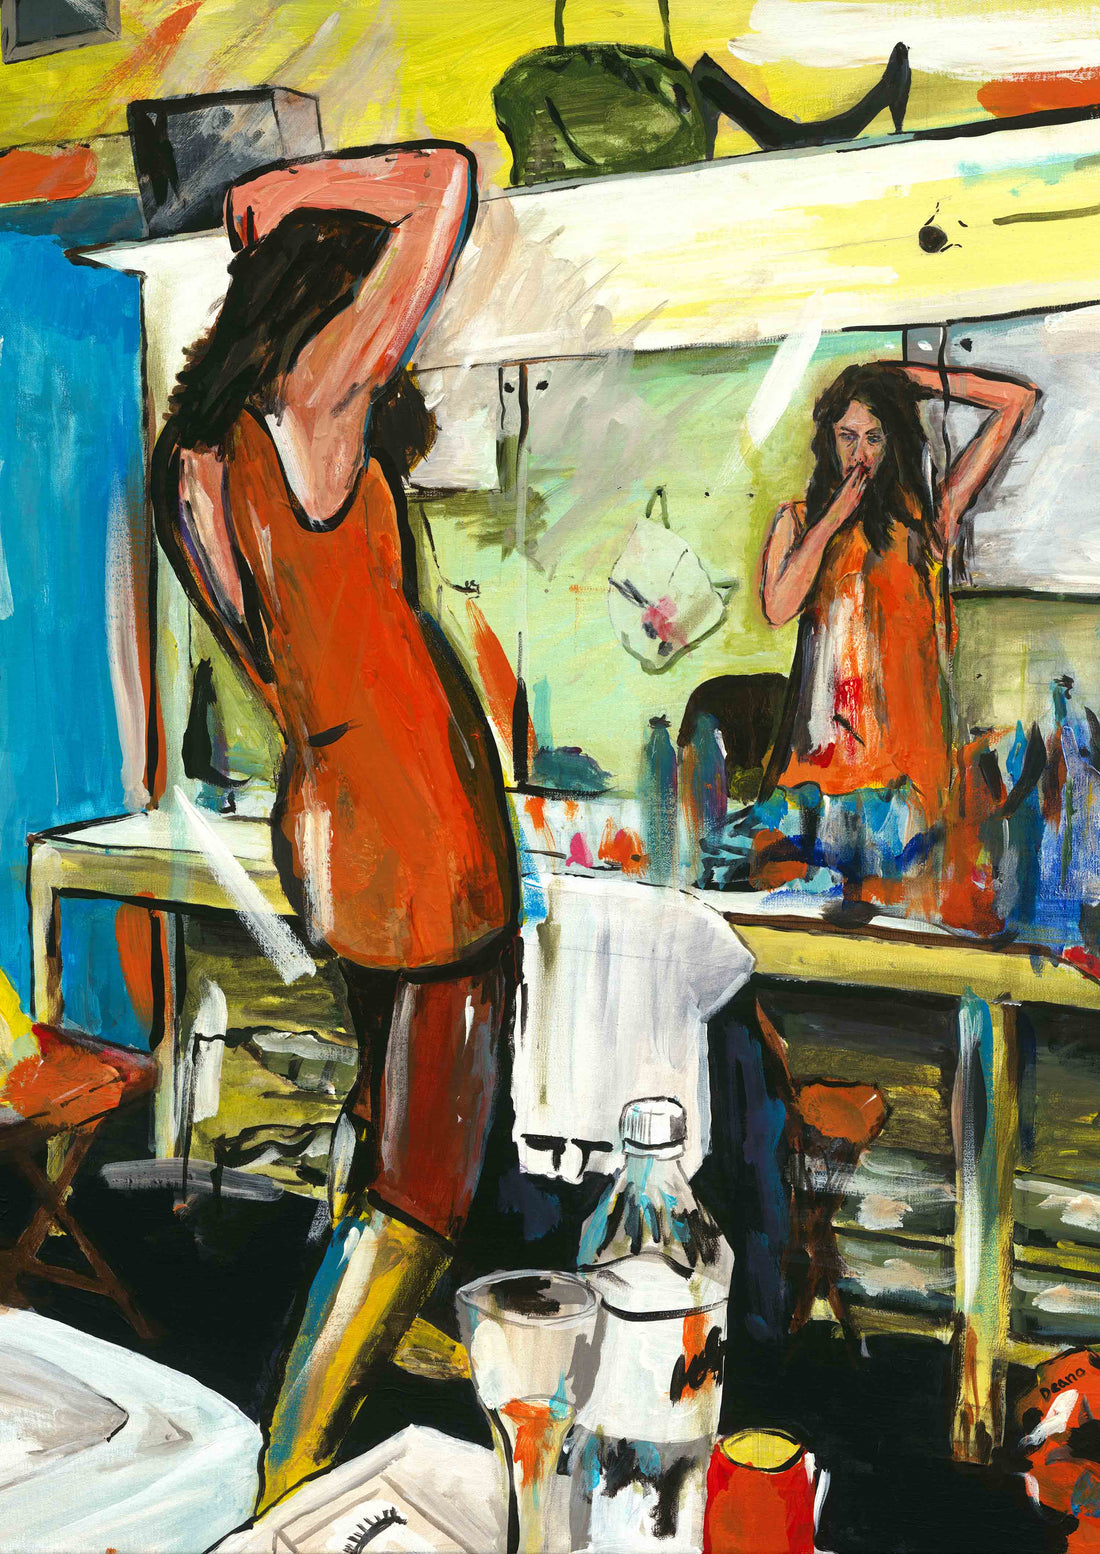 A detailed view of a limited-edition print, portraying a woman in her dressing room, amidst the artefacts of her profession.